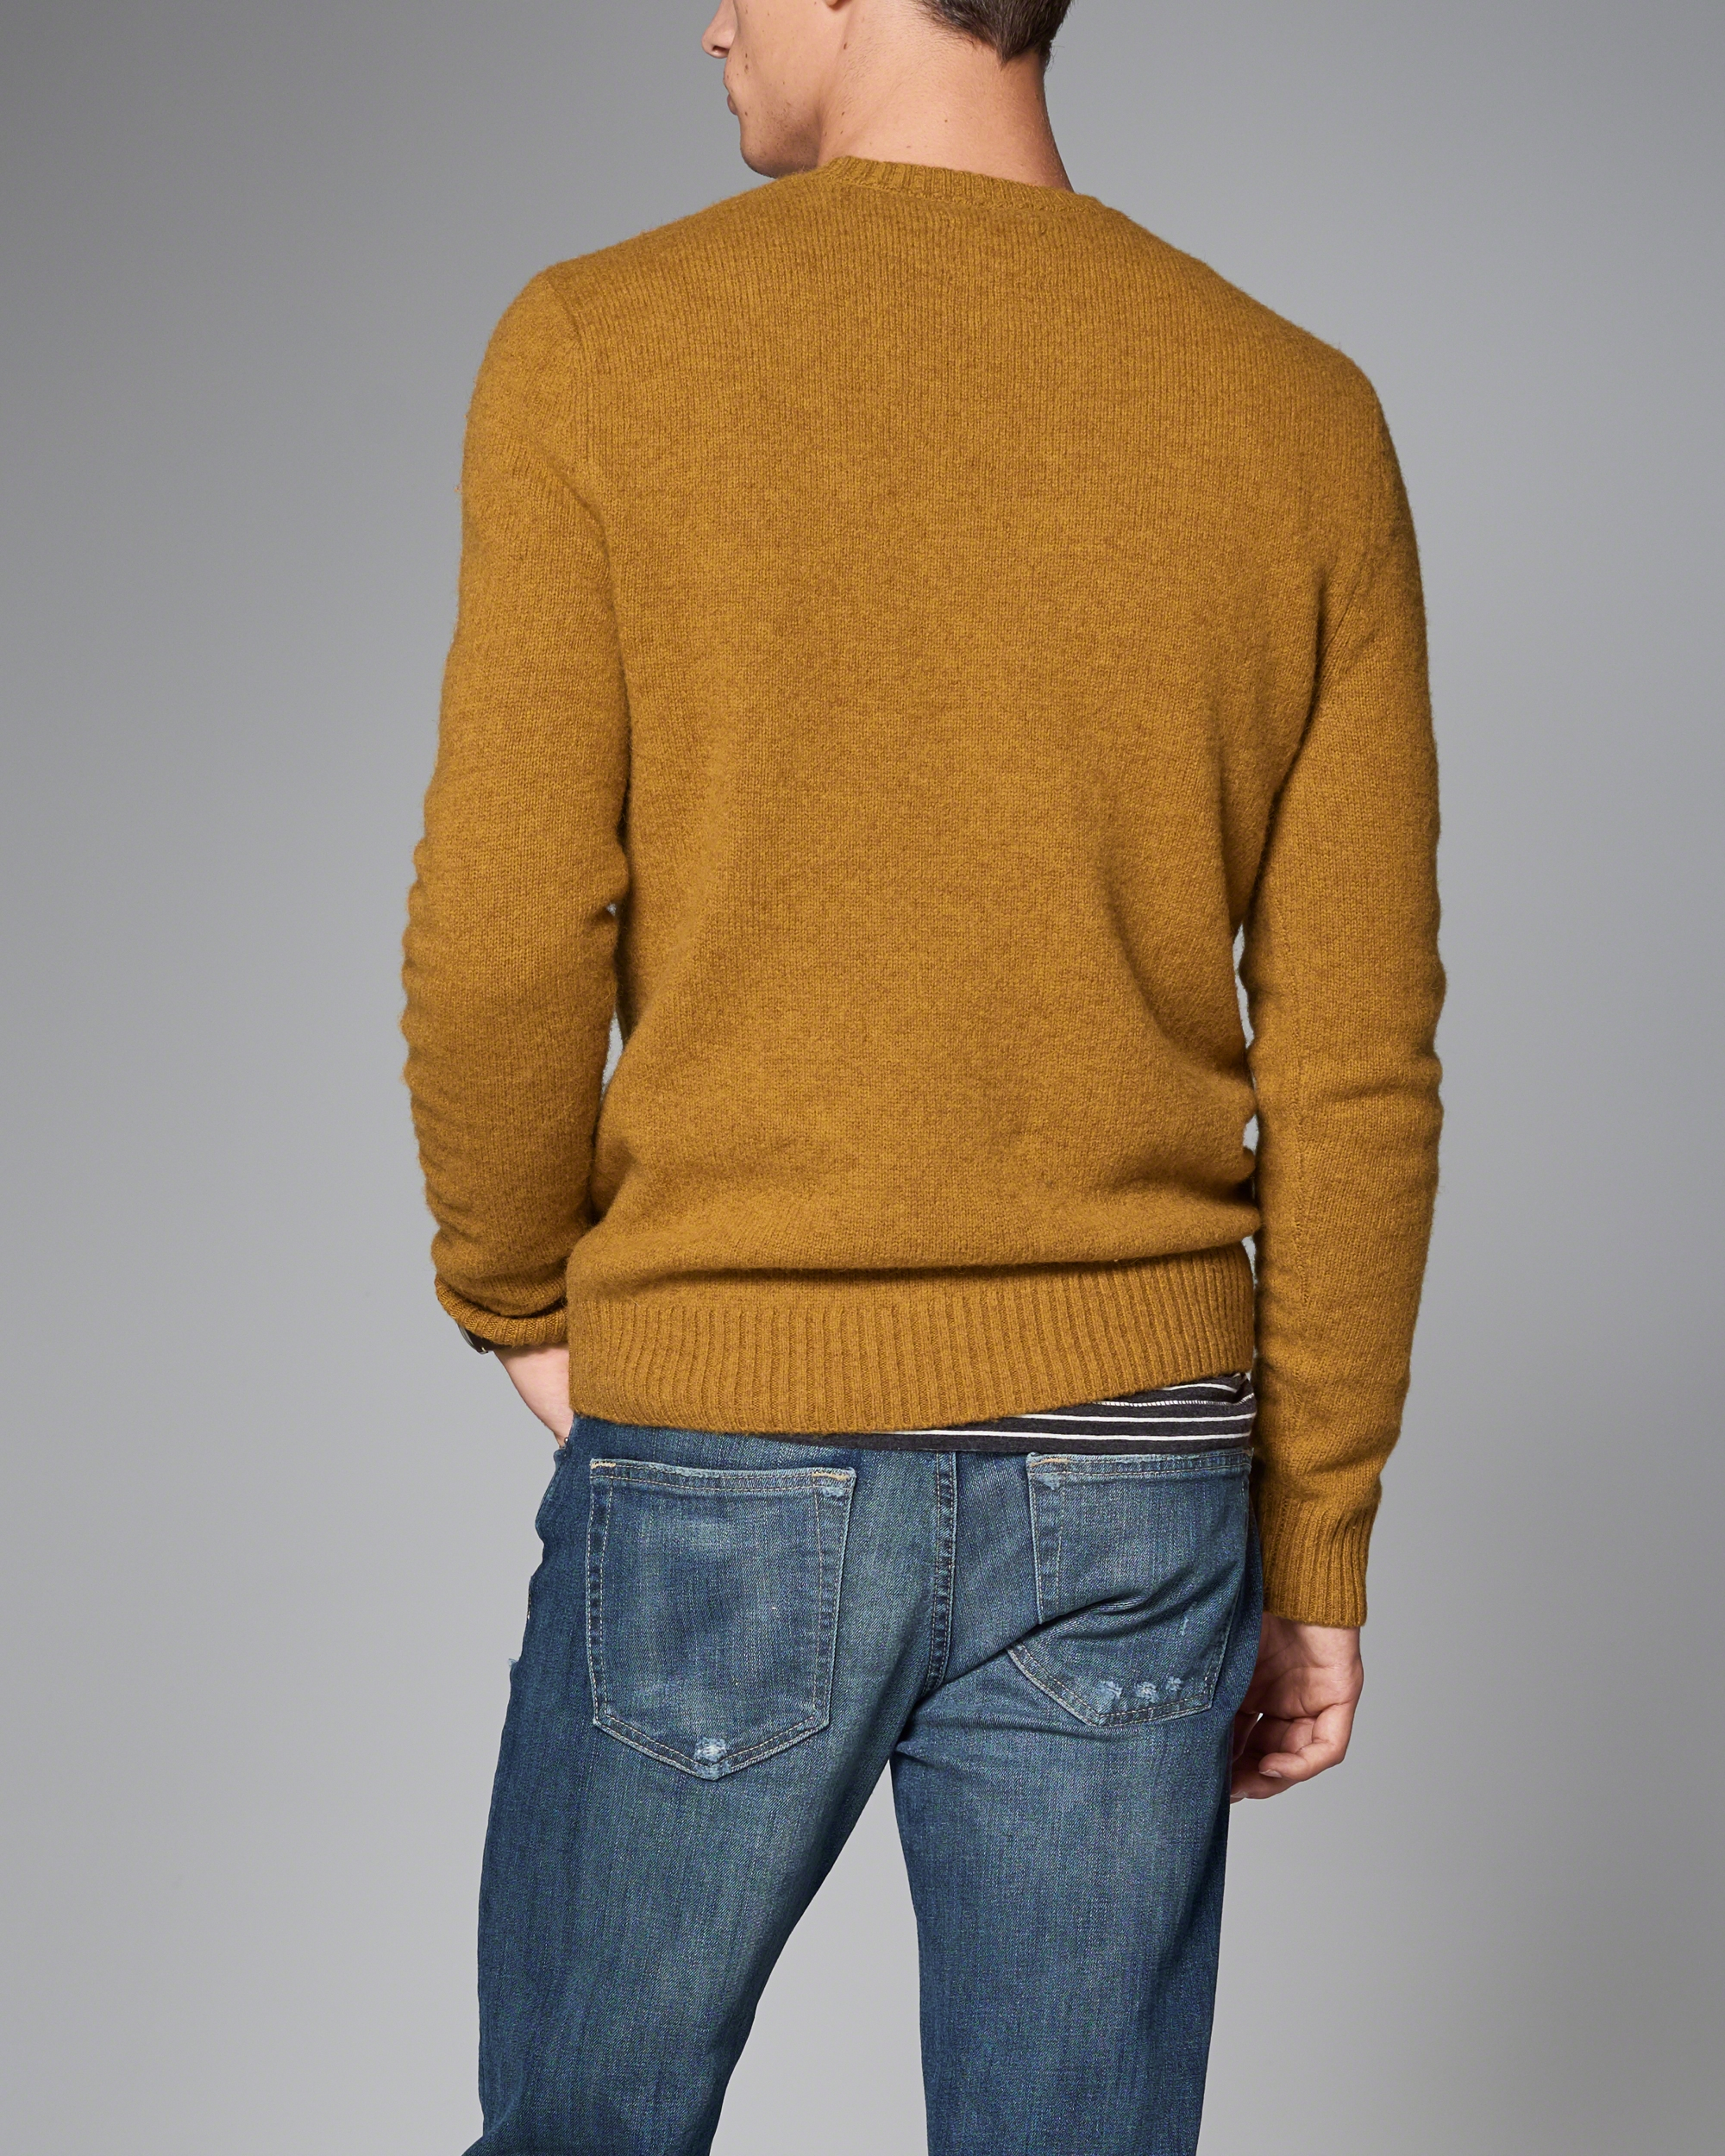 Lyst - Abercrombie & Fitch Wool Crew Sweater in Green for Men